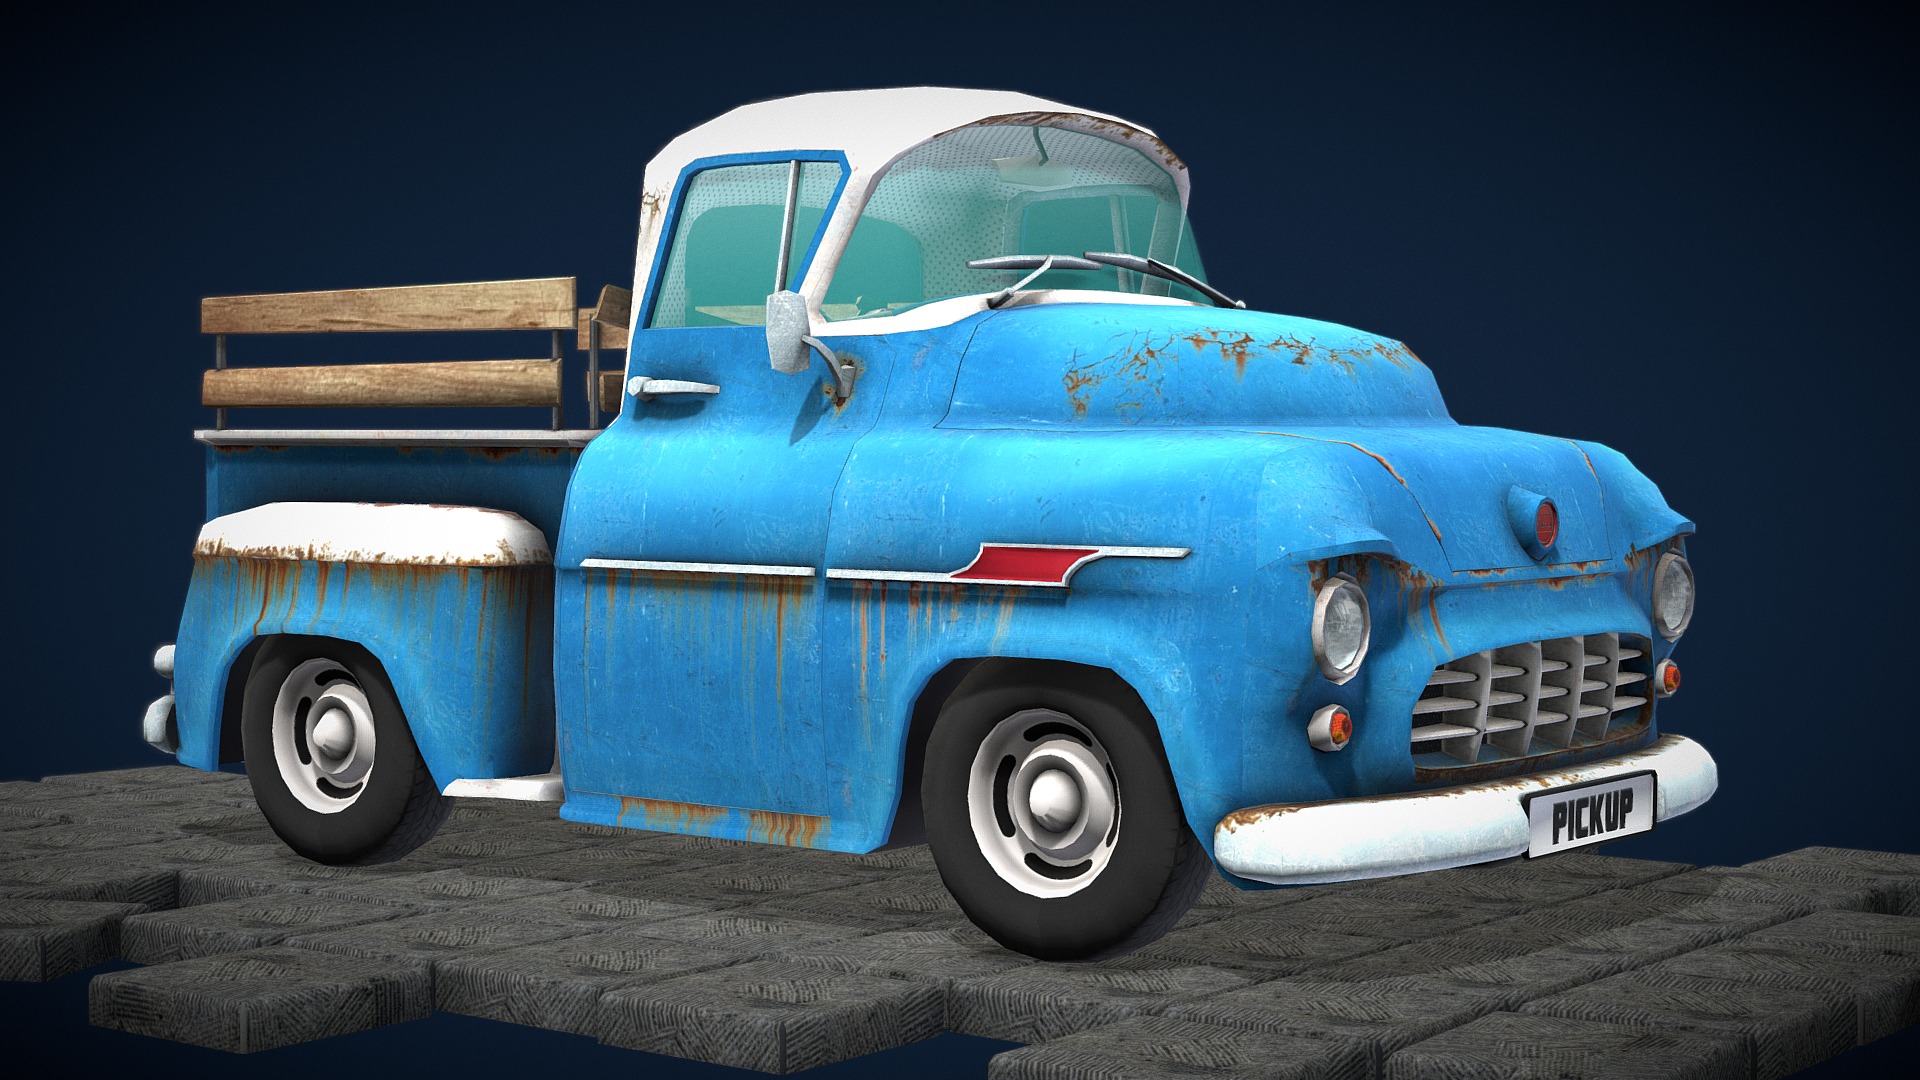 3D model Pickup – Retro Cartoon Car - This is a 3D model of the Pickup - Retro Cartoon Car. The 3D model is about a blue and white toy car.